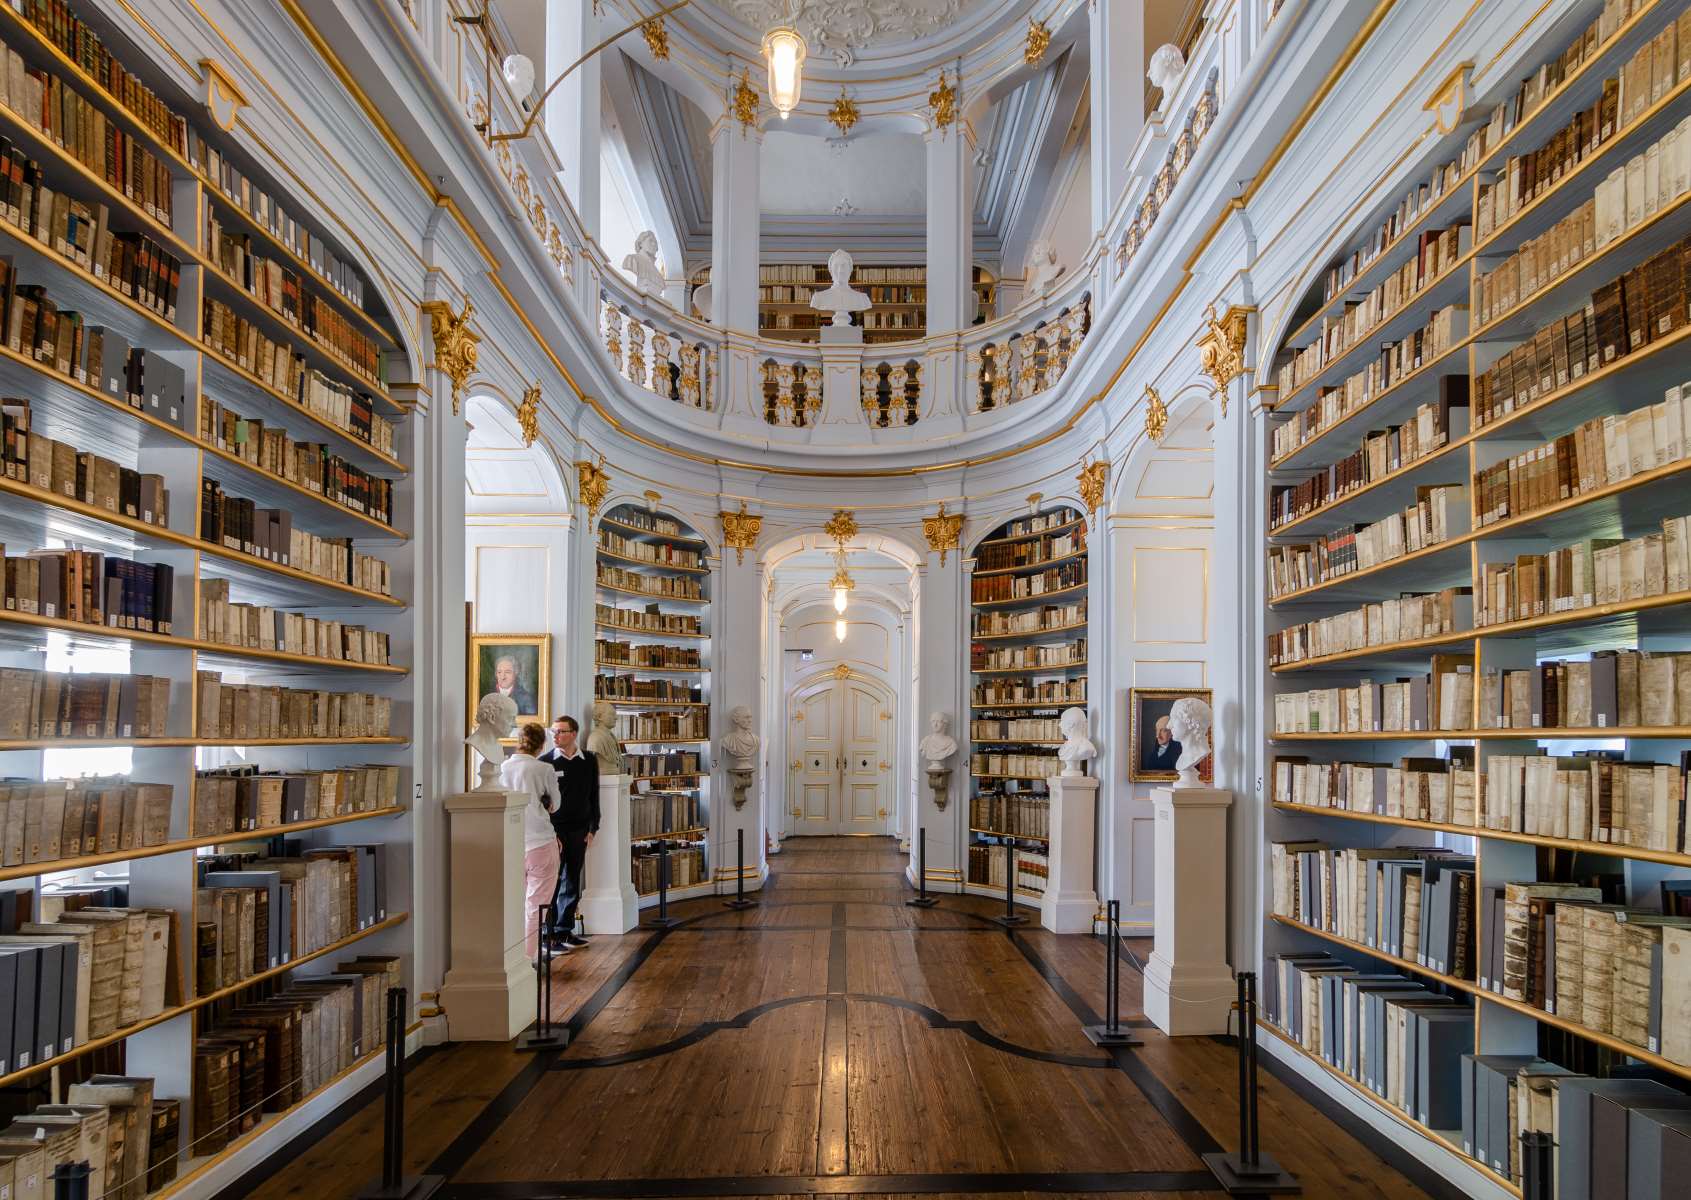 9-fascinating-facts-about-the-herzogin-anna-amalia-library